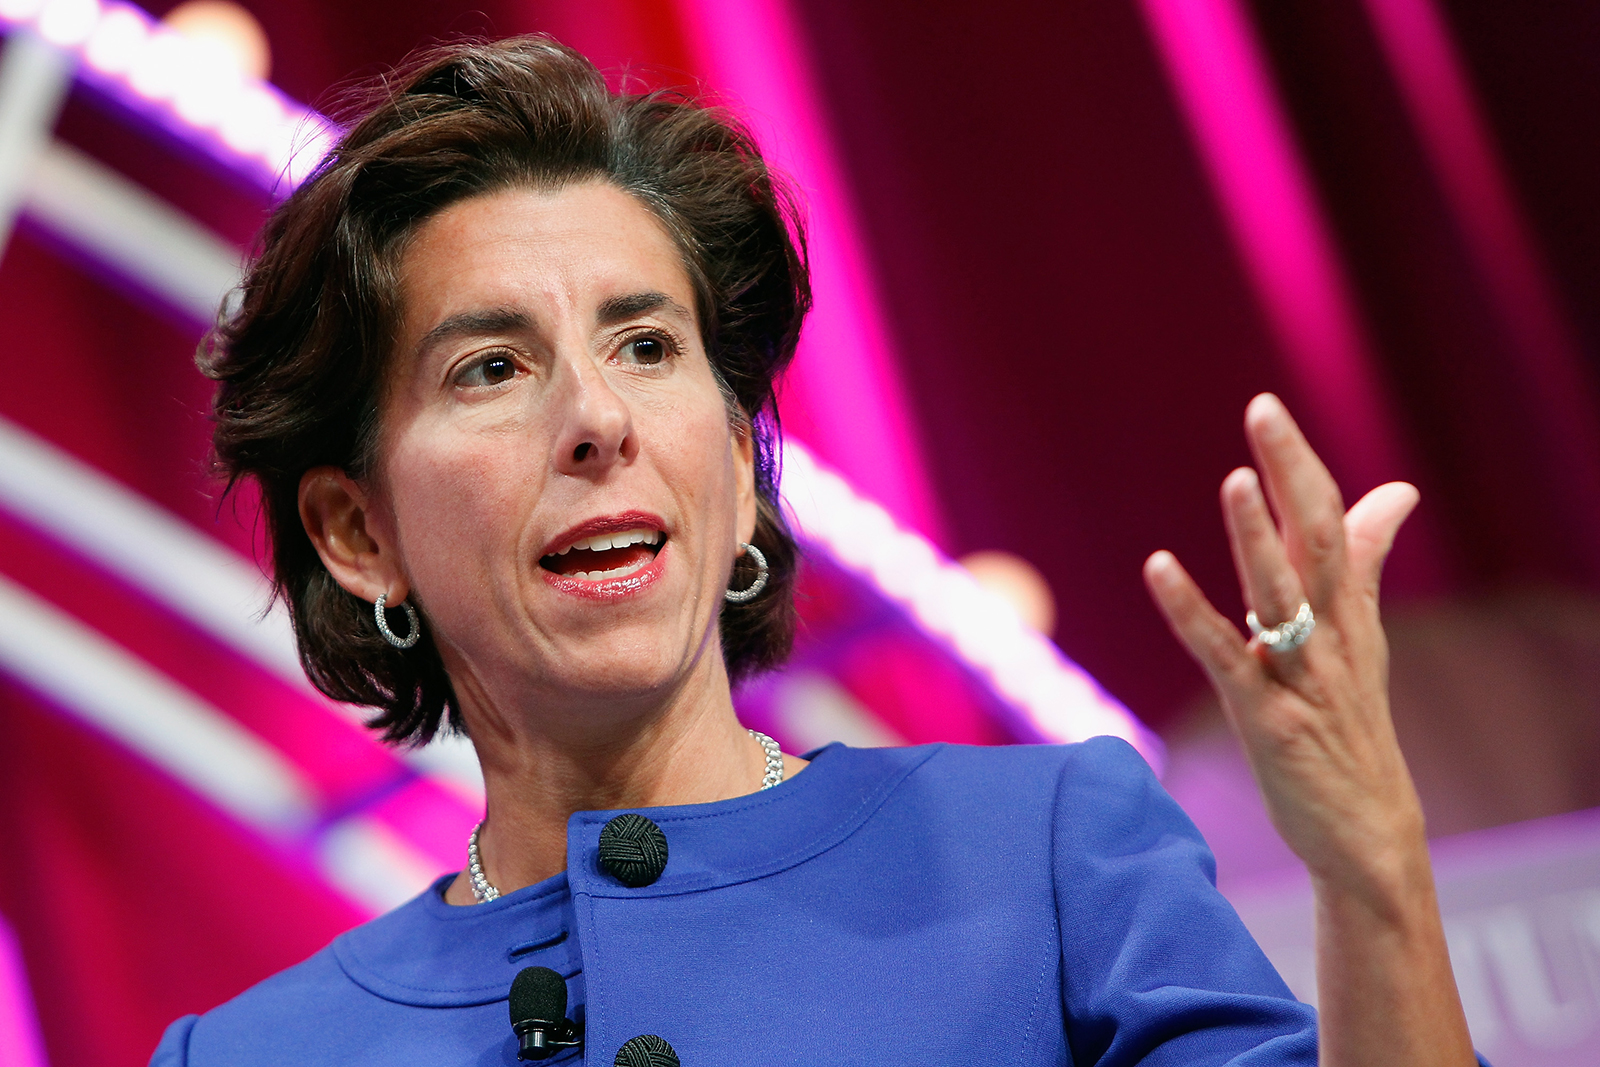 WASHINGTON, DC - OCTOBER 13: Governor of Rhode Island Gina Raimondo speaks onstage during Fortune's Most Powerful Women Summit - Day 2 at the Mandarin Oriental Hotel on October 13, 2015 in Washington, DC. (Photo by Paul Morigi/Getty Images for Fortune/Time Inc)